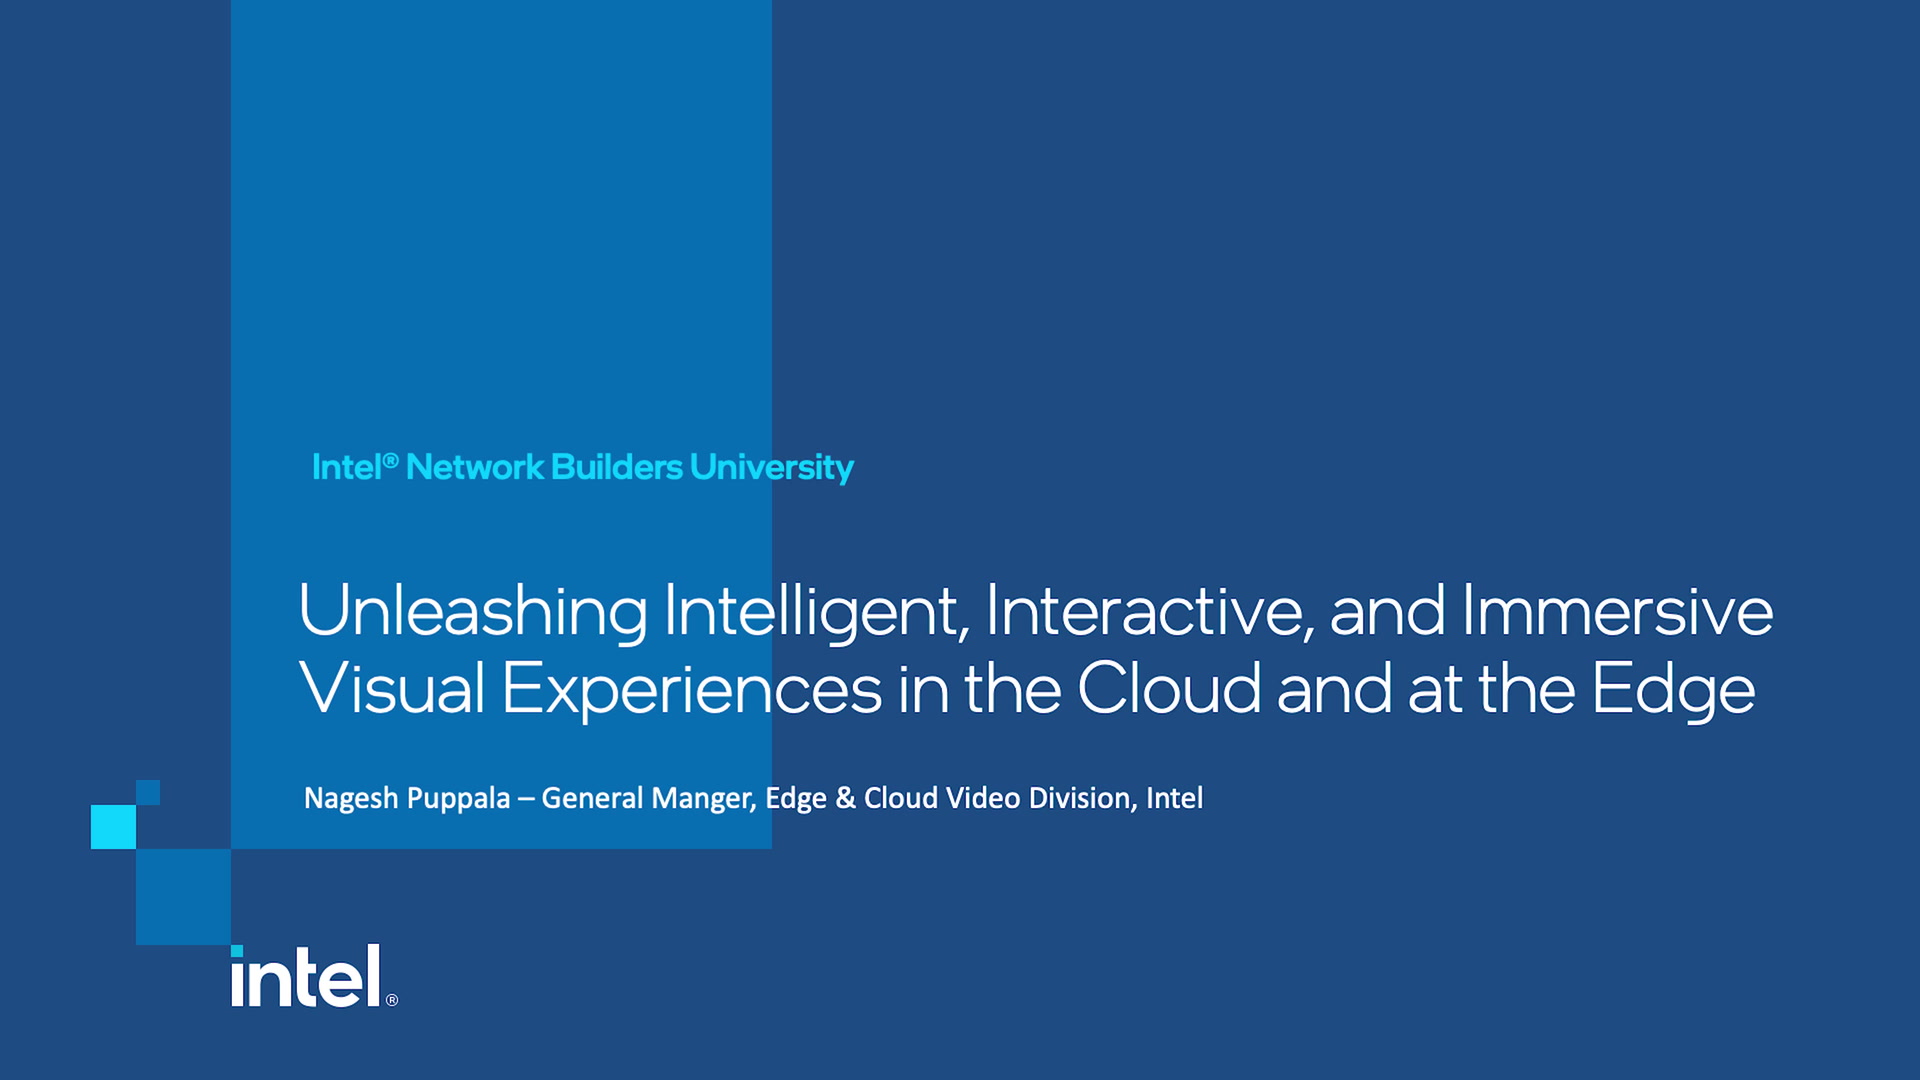 Chapter 1: Visual Experiences in the Cloud and at the Edge